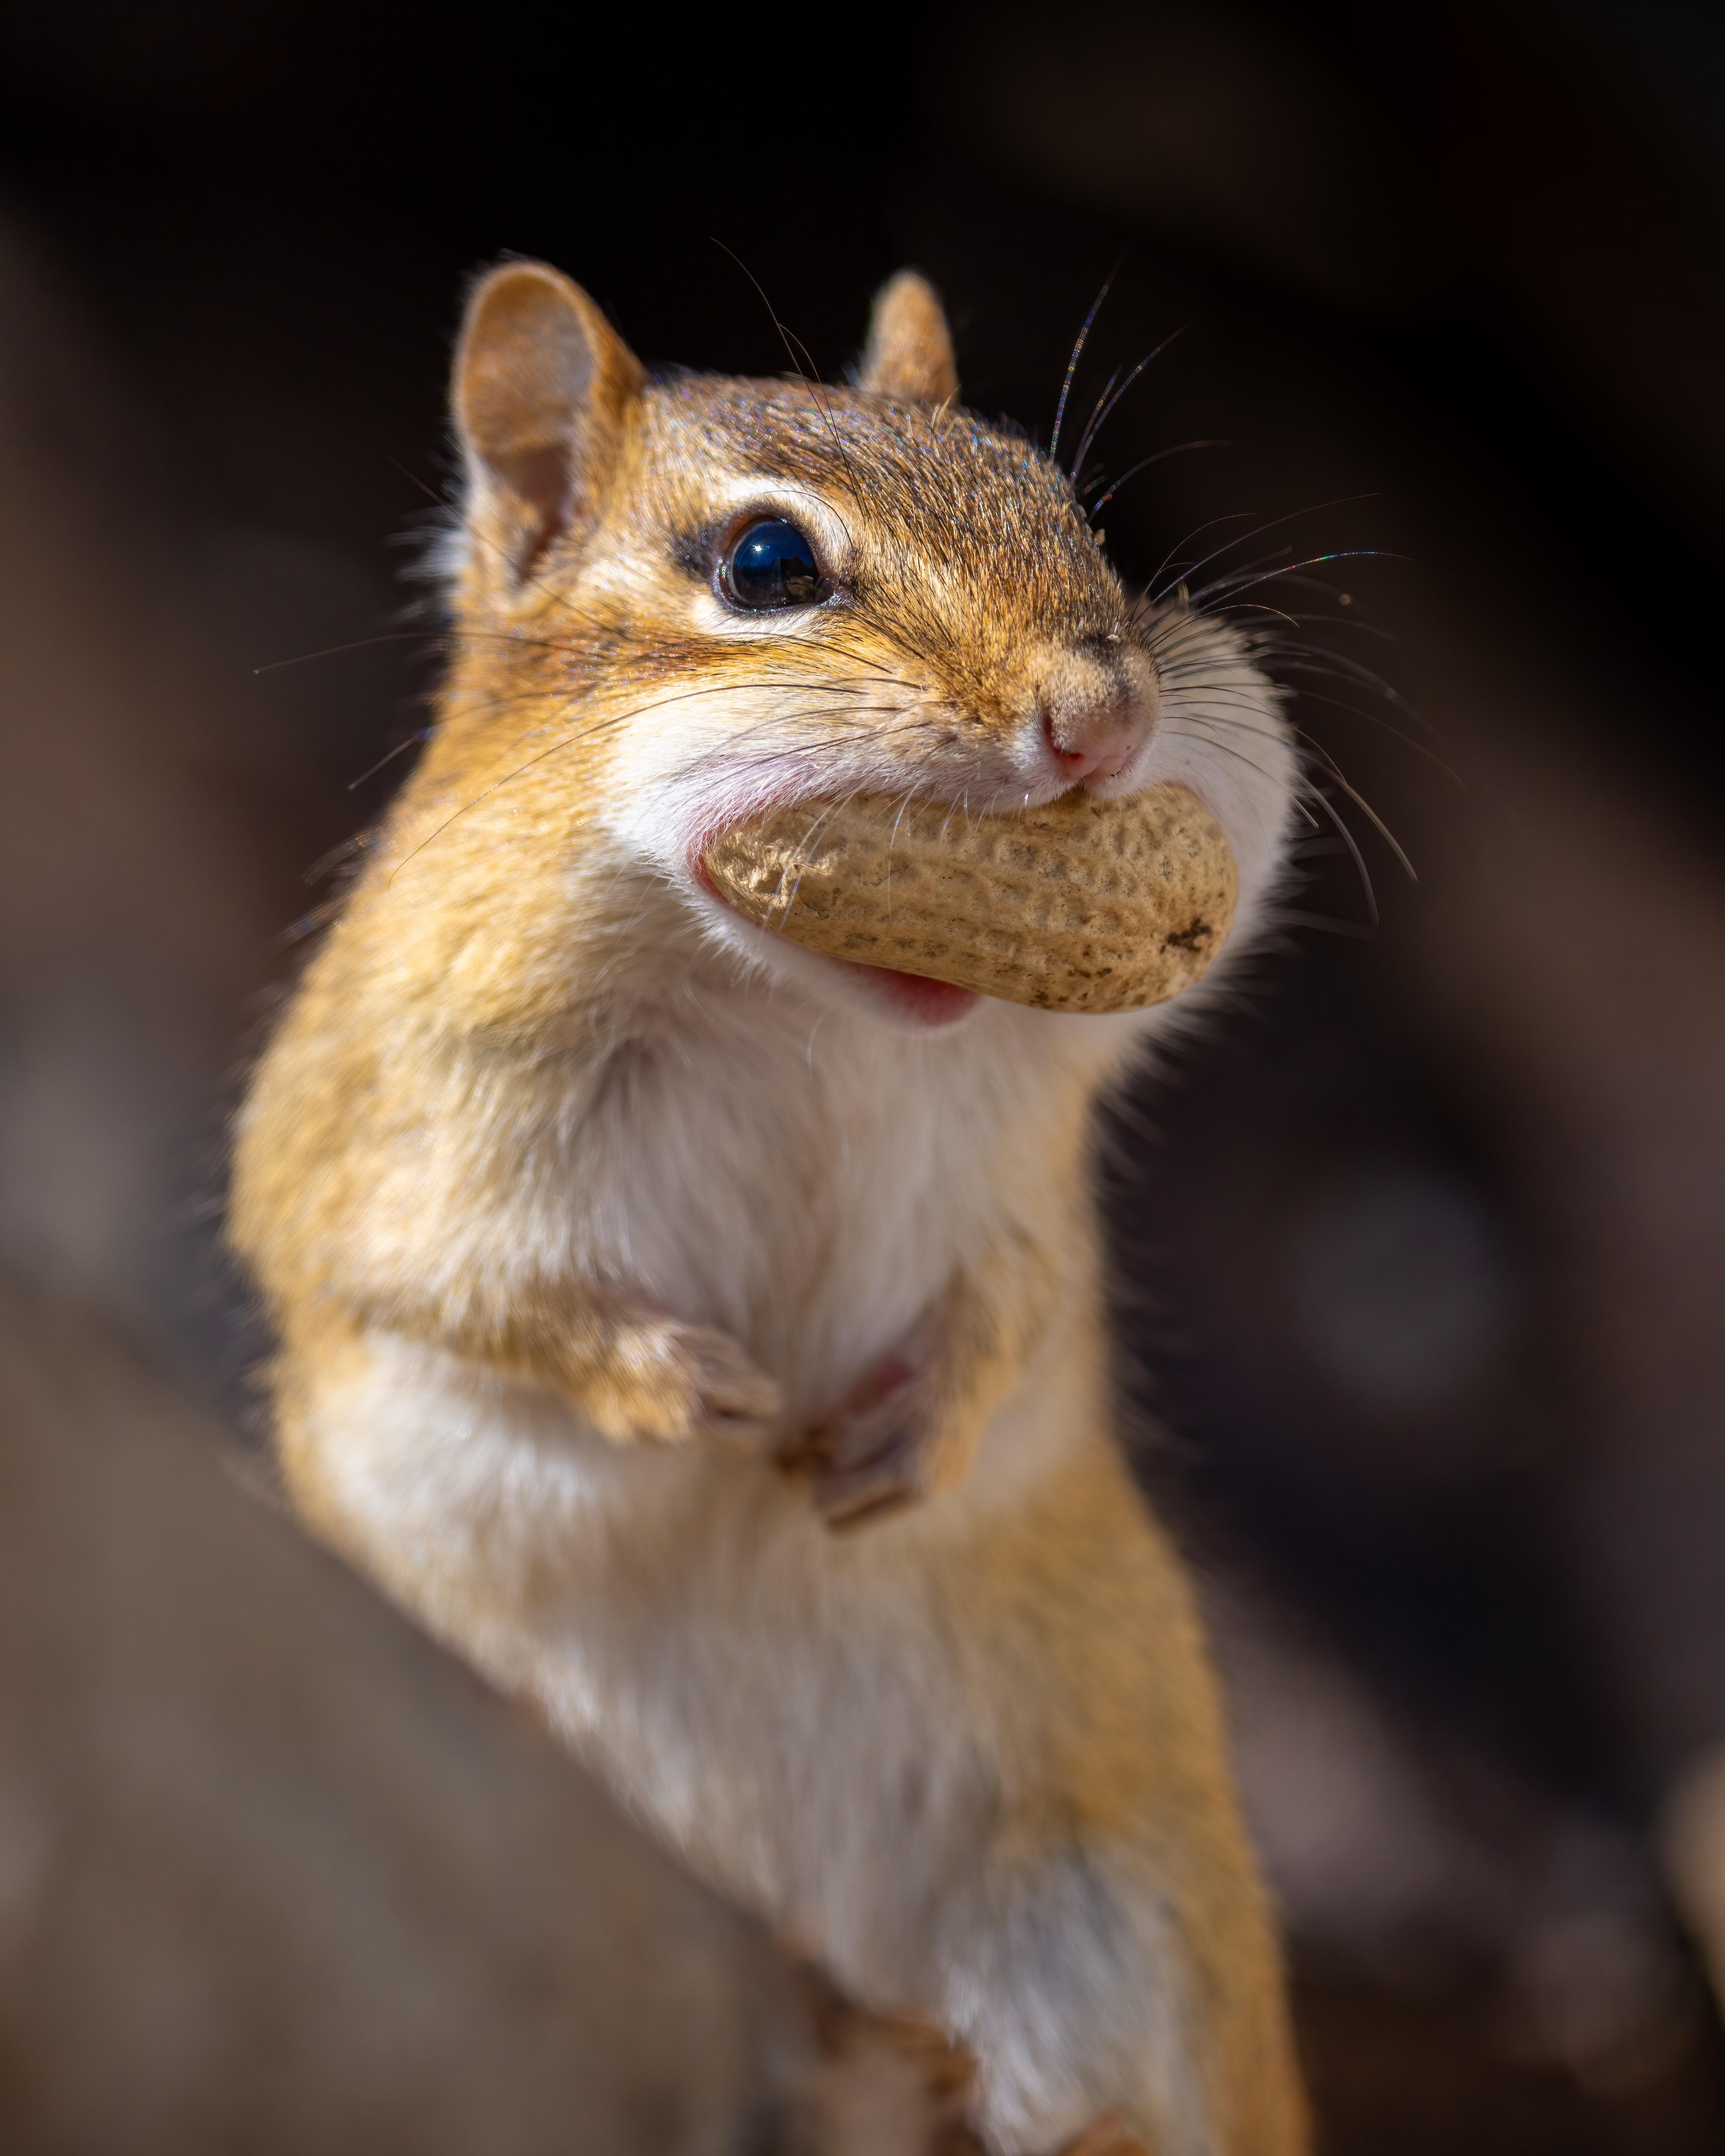  How Much Can A Chipmunk Hold In Its Cheeks 